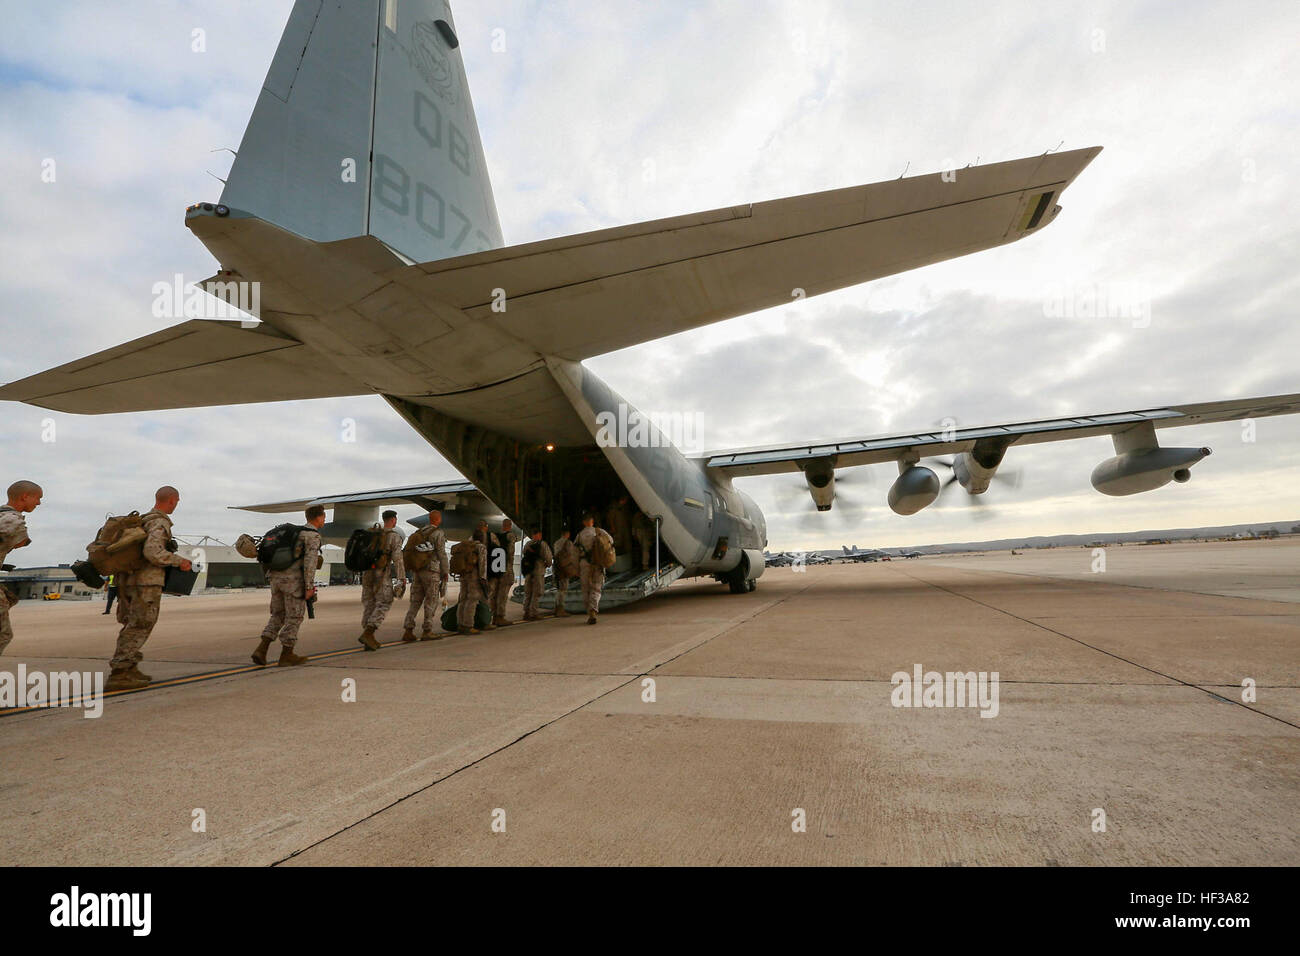 U.S. Marines with India Company, Battalion Landing Team 3rd Battalion, 1st Marine Regiment, 15th Marine Expeditionary Unit, board a KC-130J Hercules aboard Marine Corps Air Station Miramar, Calif., May 13, 2015. The Marines of BLT 3/1 head to Hawaii for sustainment training before boarding the USS Anchorage (LPD-23) for their deployment through the Pacific and Central Command area. (U.S. Marine Corps photo by Sgt. Jamean Berry/Released) Leaving on a jet plane, 3-1 Marines depart for Hawaii 150513-M-GC438-036 Stock Photo